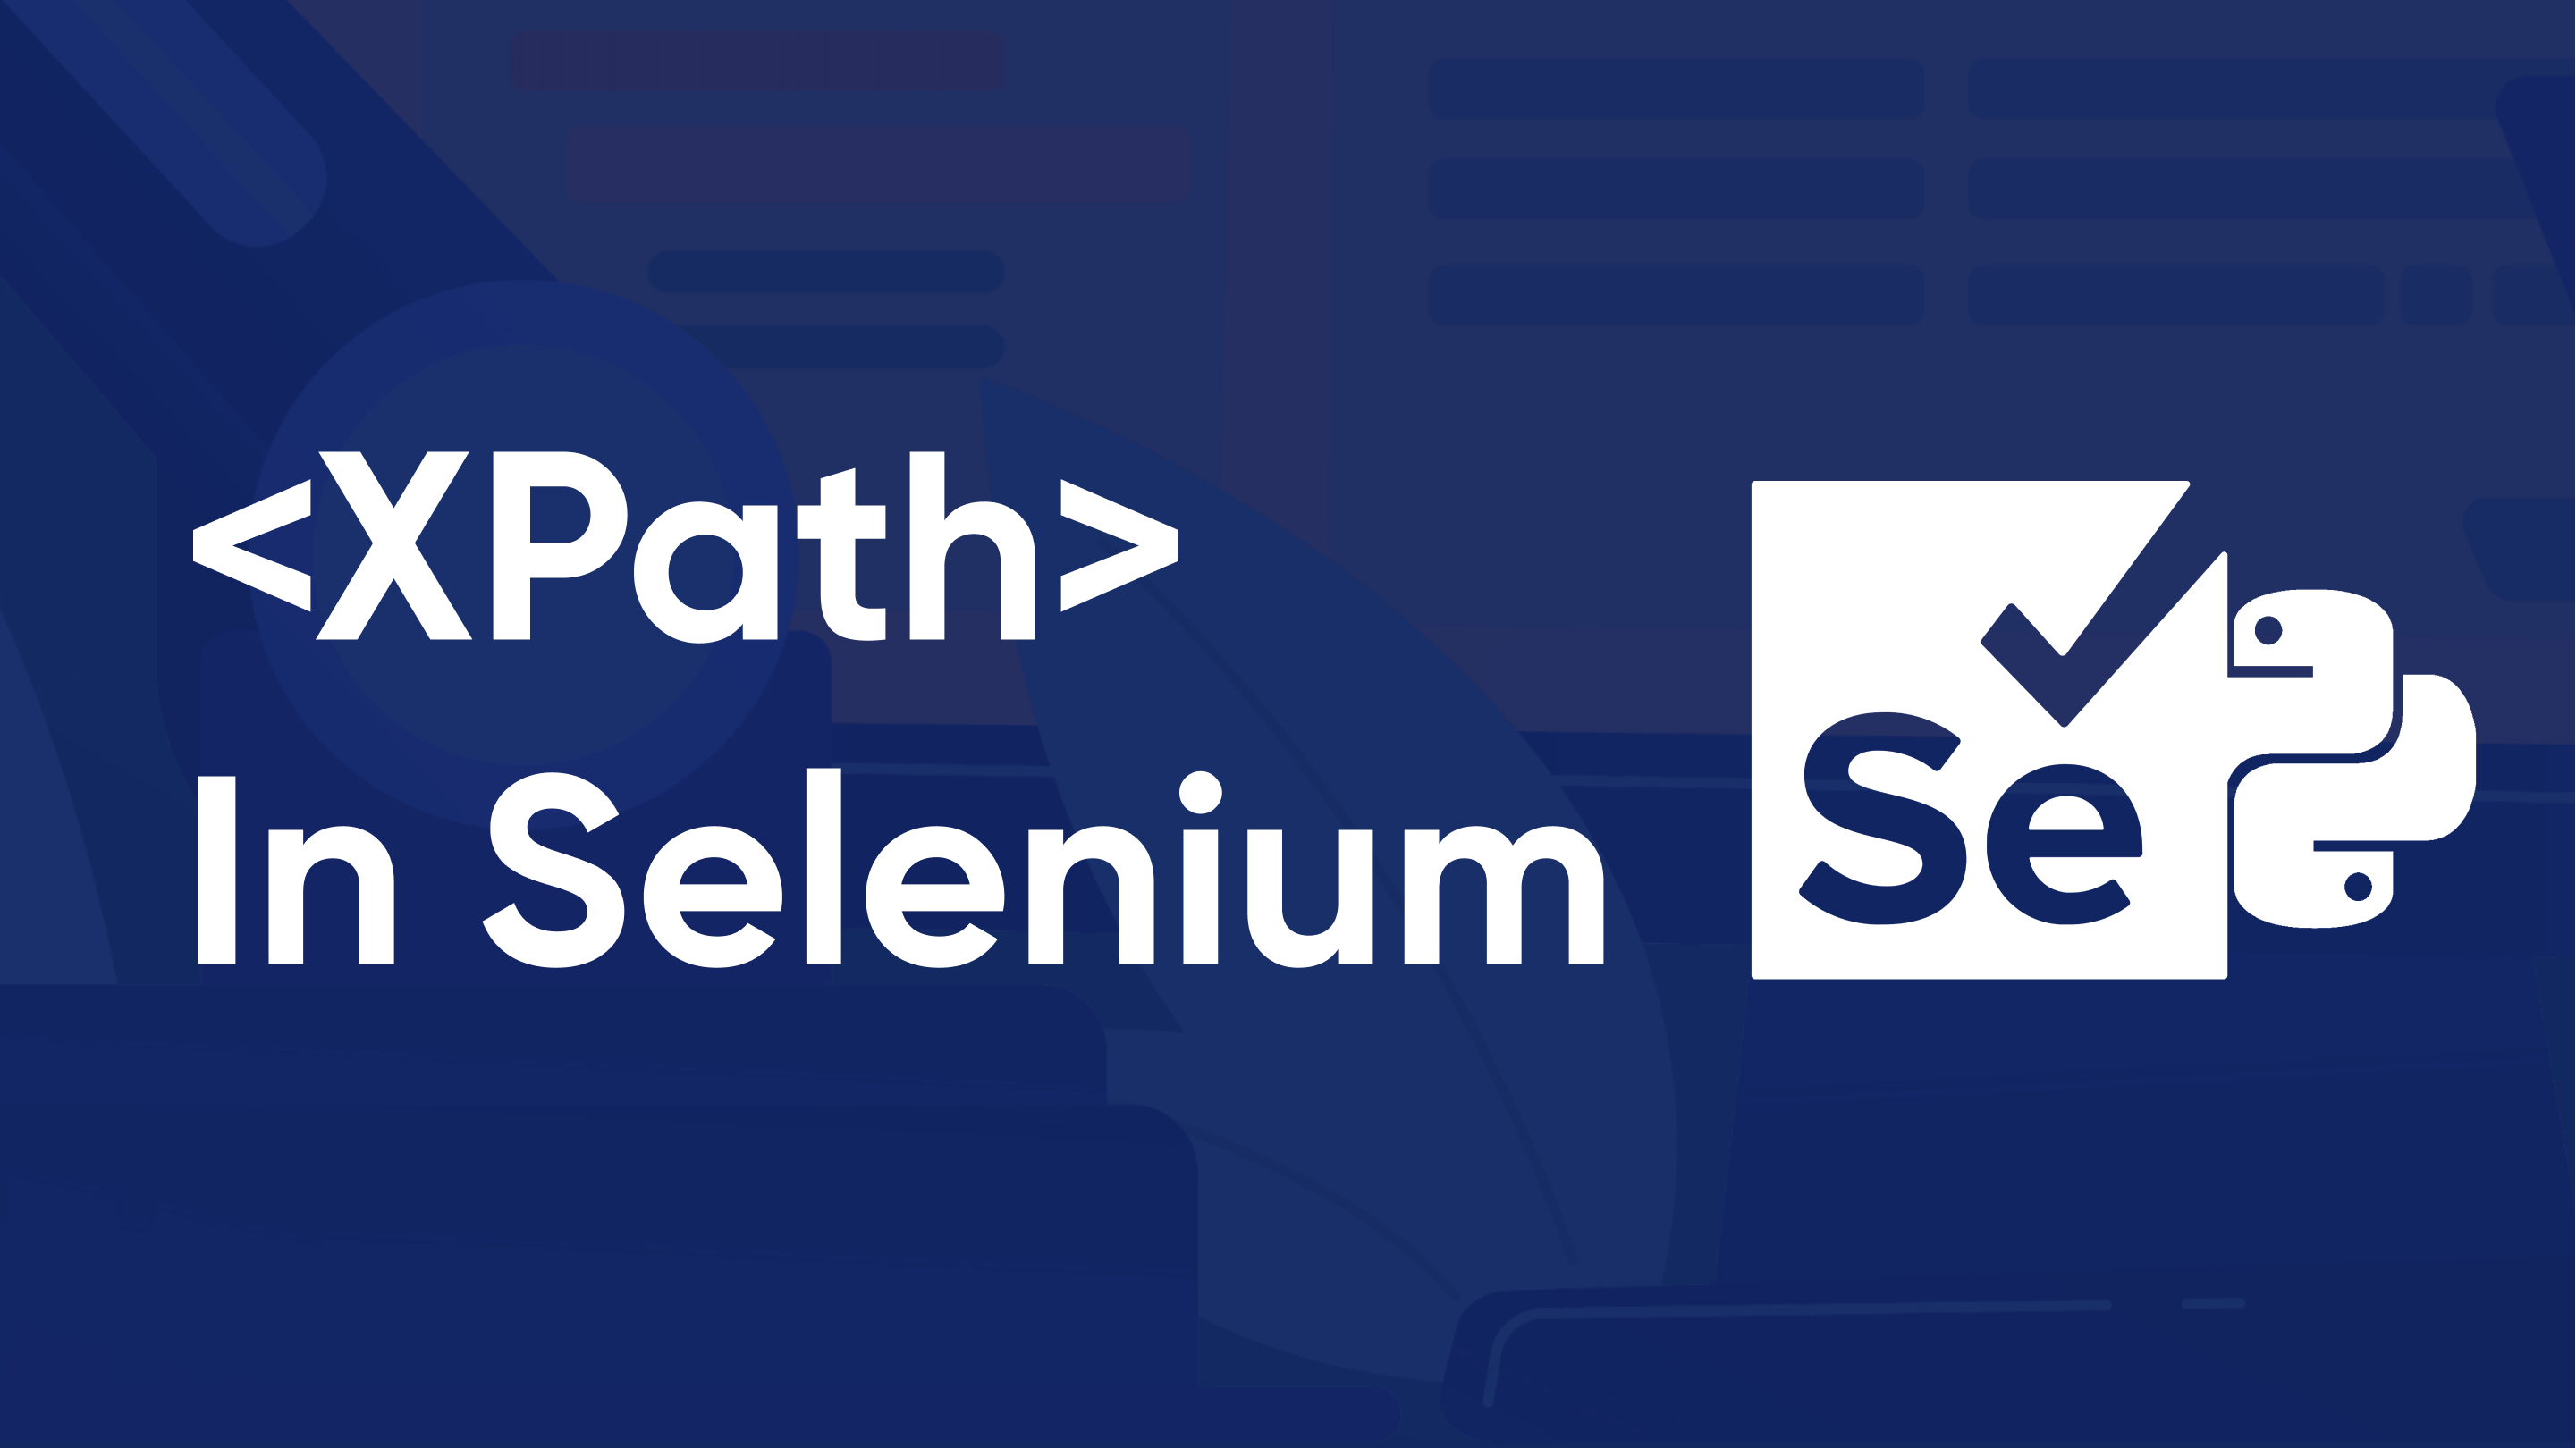 Web Scraping with XPath in Selenium